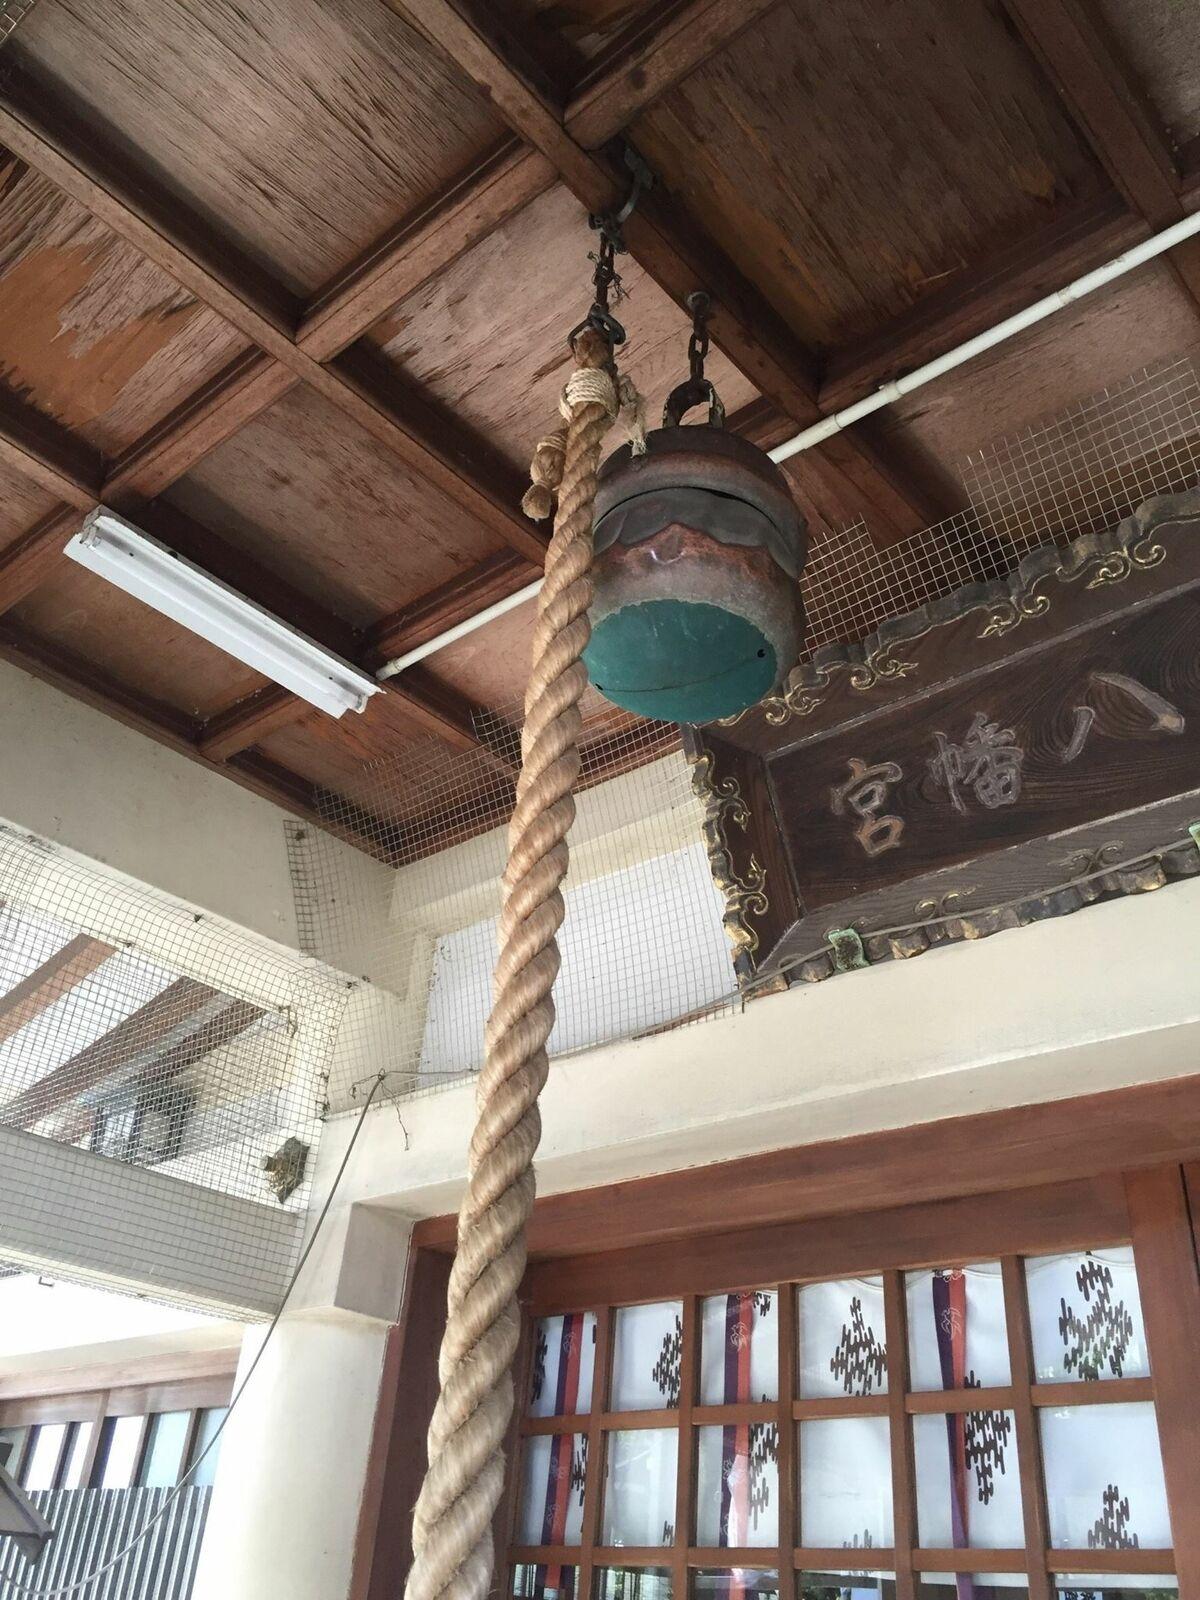 A genuine de-accession from a temple shrine in Nakamura Ward, Nagoya, Japan 

Authentically Temple used,  96 inches long, and with a massive 18 inch high hand hammered copper bell 

Comes this extraordinary opportunity to acquire, collect and